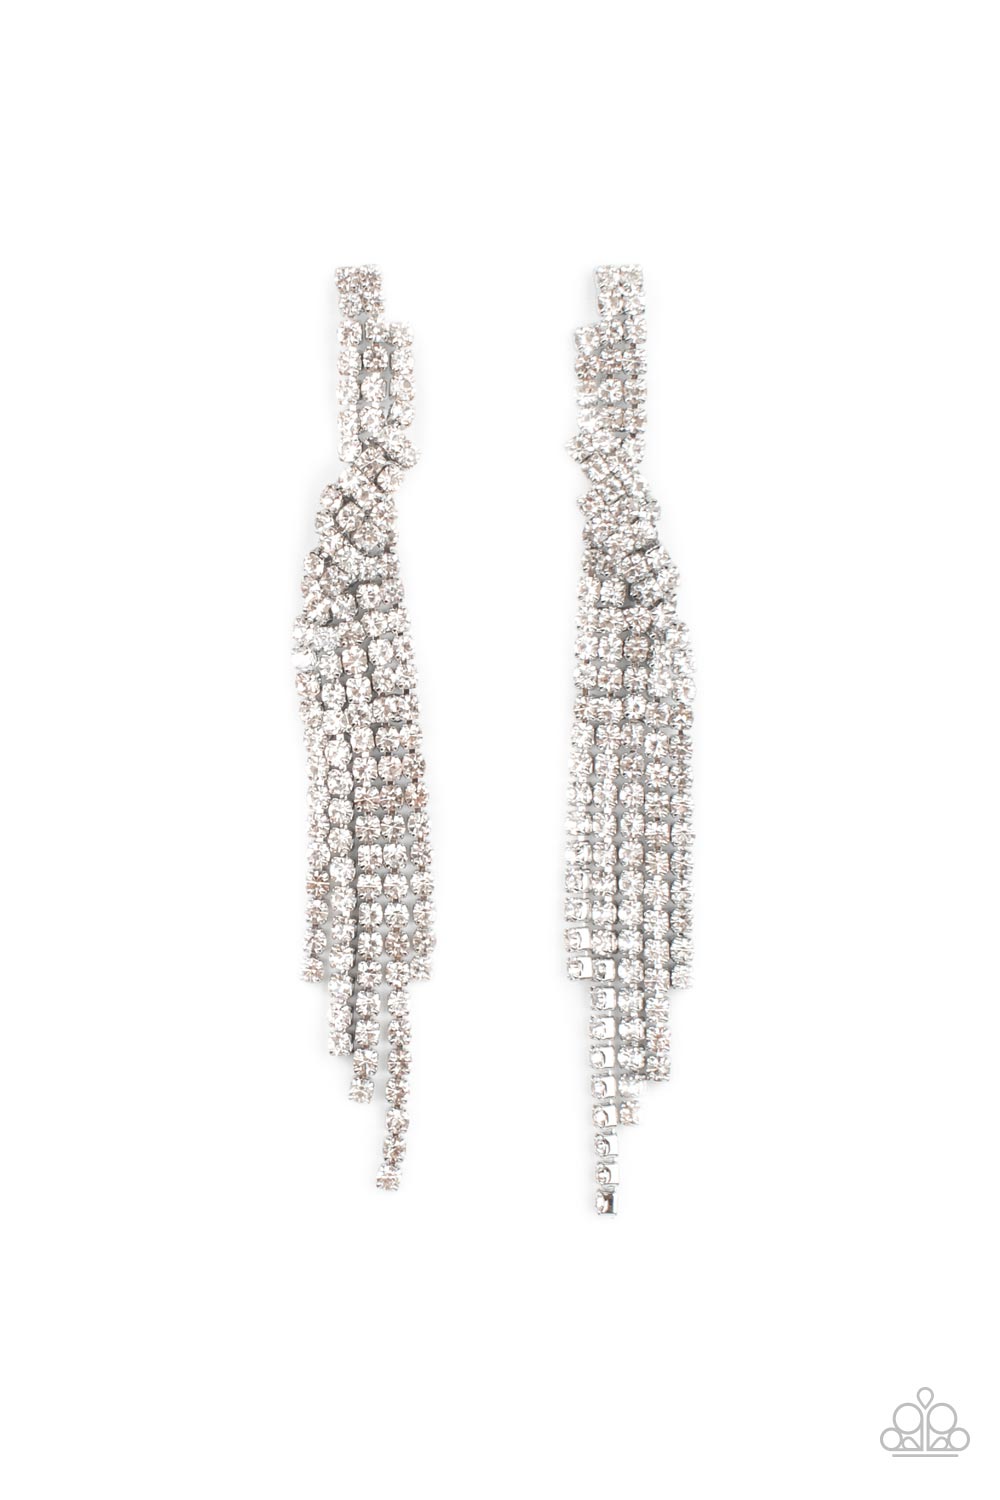 Paparazzi Cosmic Candescence - White Earrings - March 2022 Life Of The Party Exclusive - A Finishing Touch Jewelry